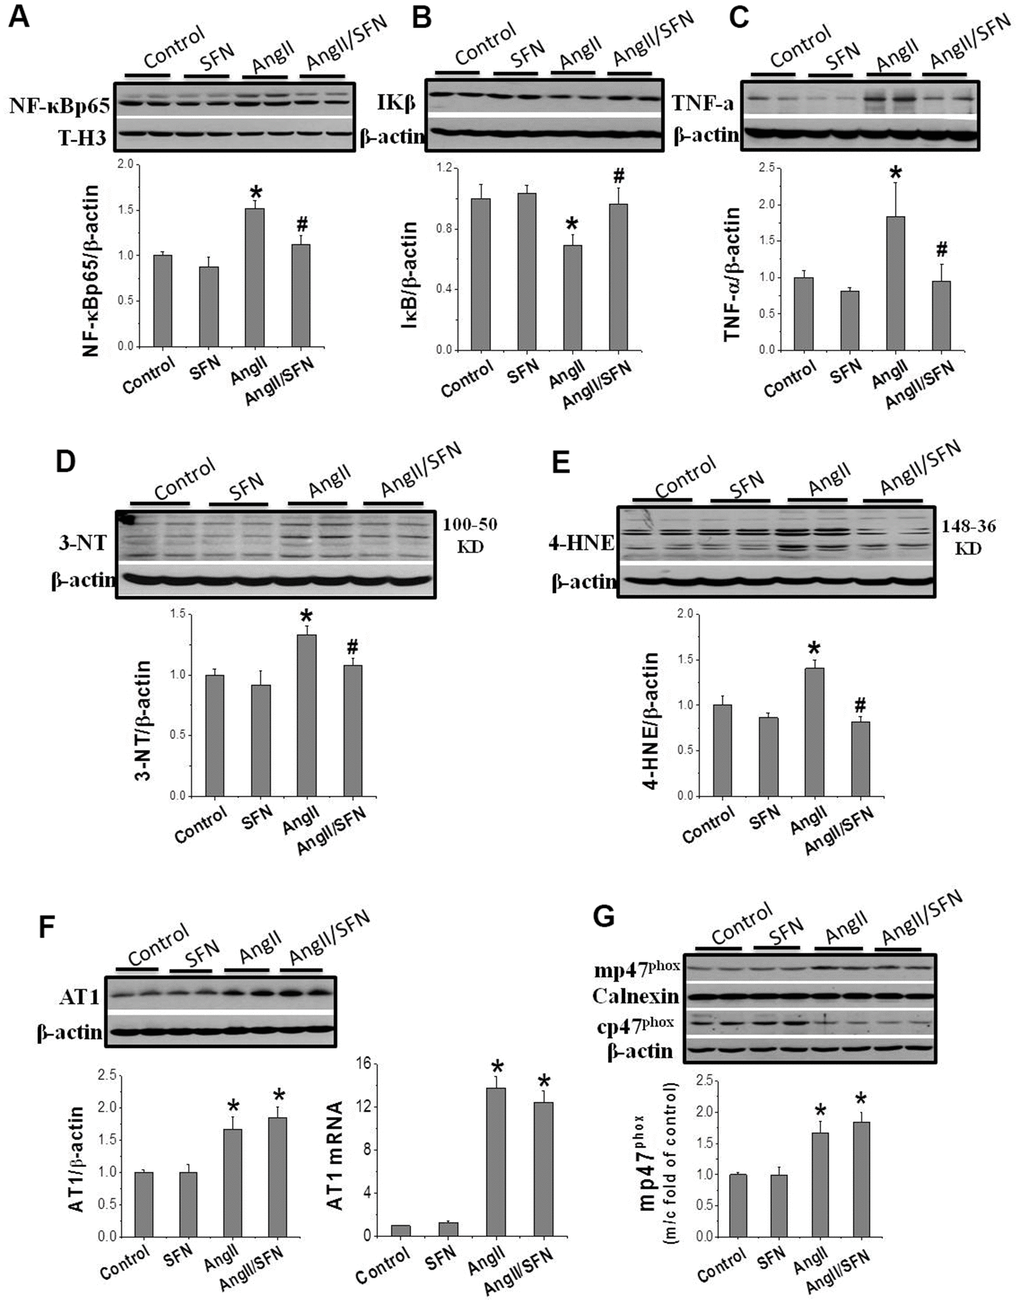 SFN inhibits Ang II-induced inflammation and oxidative stress. Western blot was used to detect the expression of inflammatory factors NF-κB (A), IKβ (B), TNF-α (C), oxidative stress indicators 3-NT (D), 4-HNE (E). Data were presented as the mean SD (n = 3). SFN has no effect on the activation of AT1 and NOX. Western blot and qPCR were used to detect the AT1 expression (F). Western blot was used to detect the expression of mp47phox and cp47phox (G). Data were presented as the mean SD (n = 3). *P P 